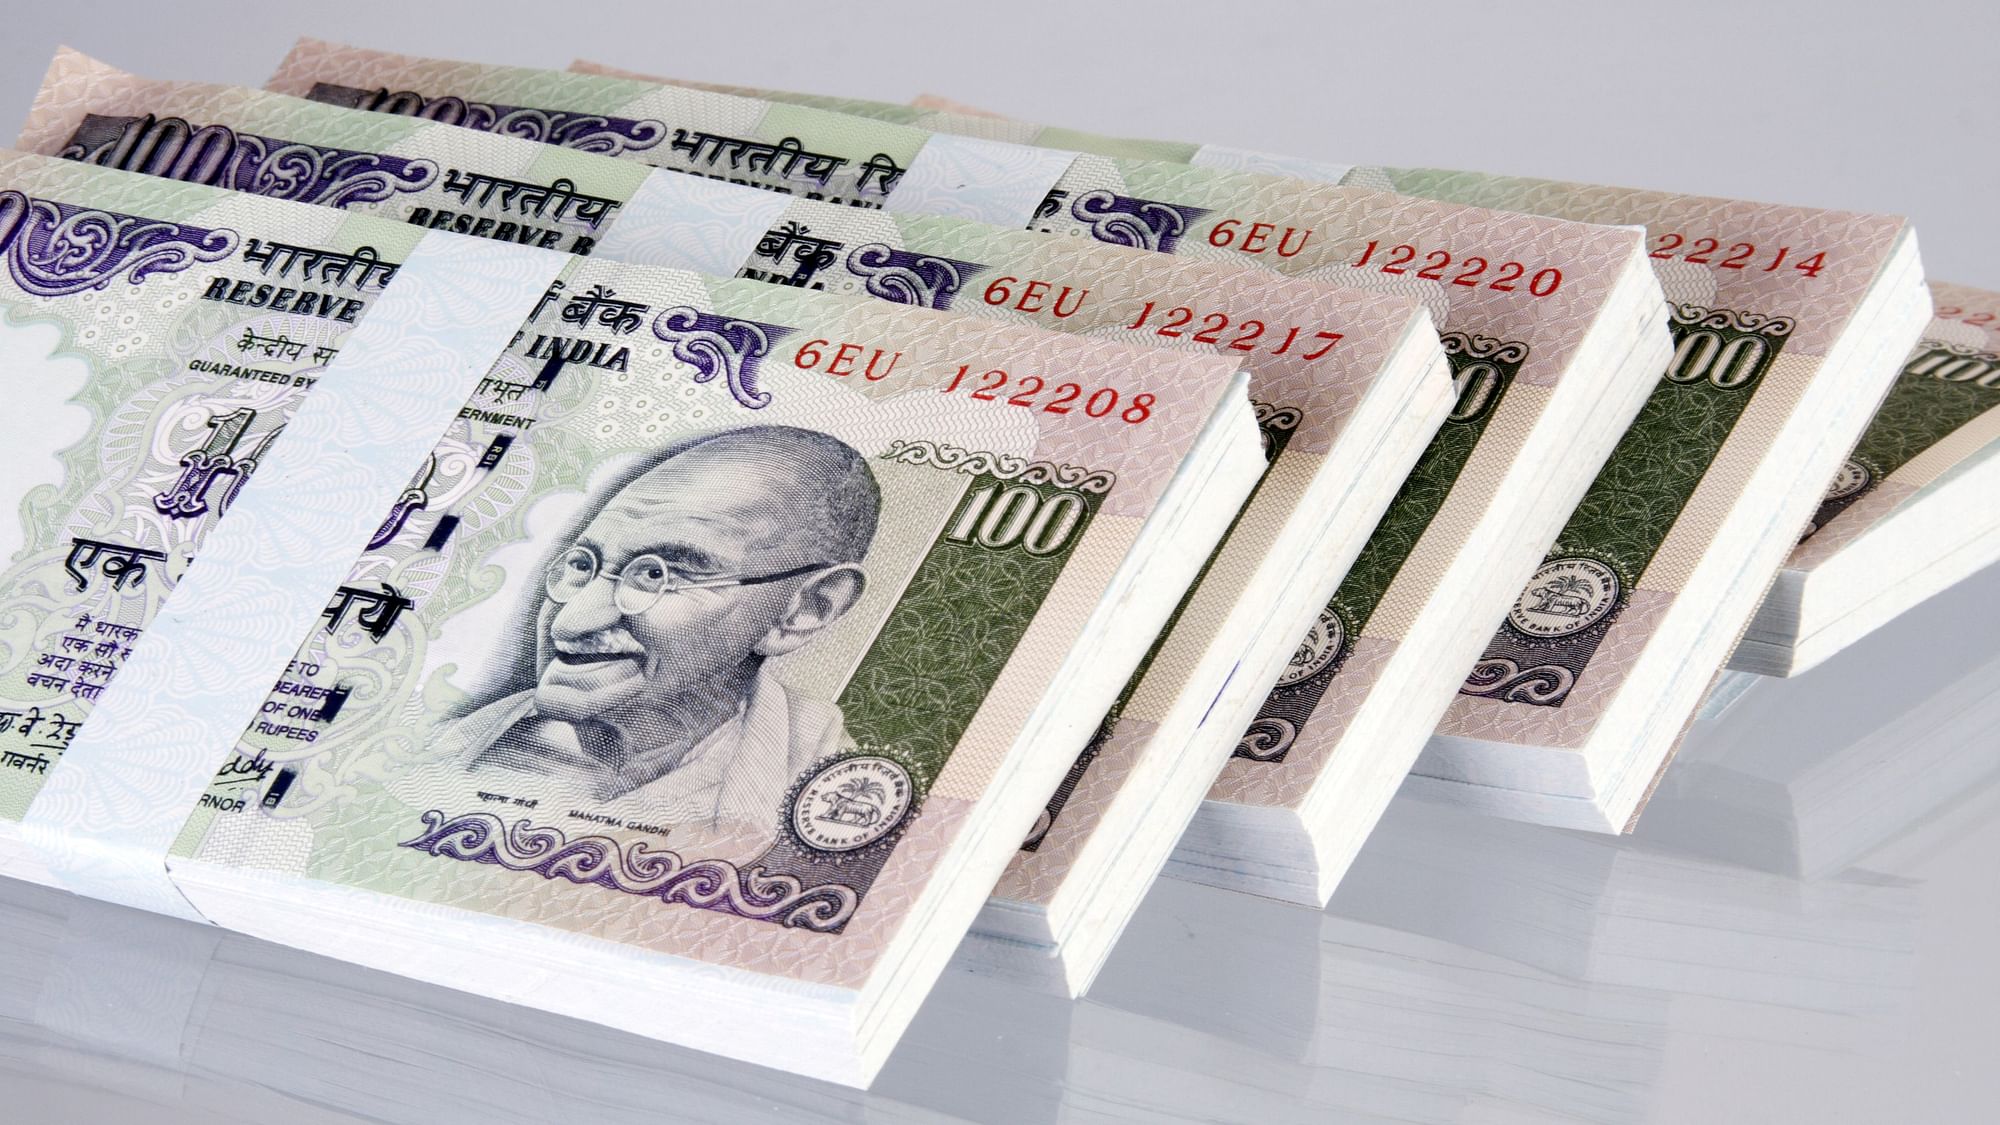 The central bank said in its circular letter that Indian currency of 200, 500 and 2,000 denominations cannot be carried and used for trading.